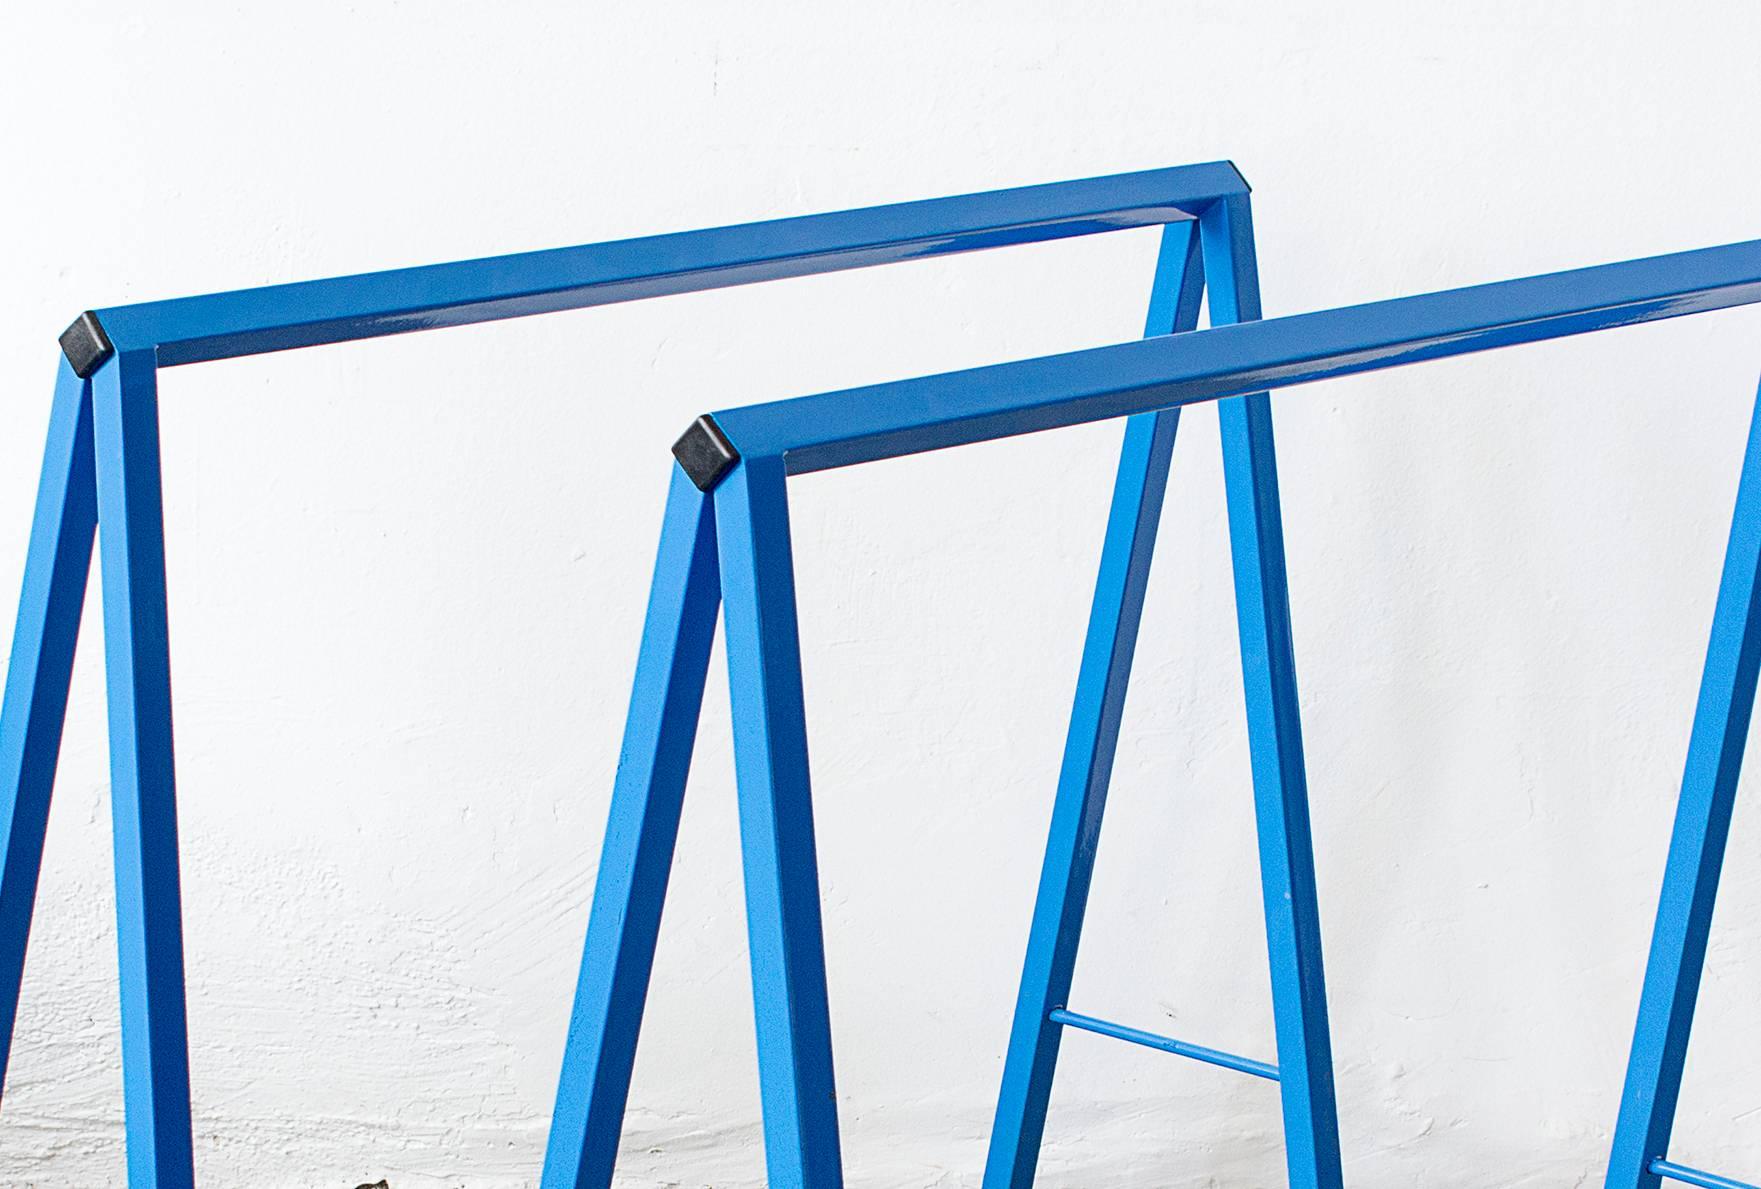 We put a spin on our vintage steel A-frame table legs! This excellent pair is newly refinished with a bright "m&m blue" powder-coat. Finish your A-frame with a cut of glass, stone or reclaimed wood for a modular table of any width.